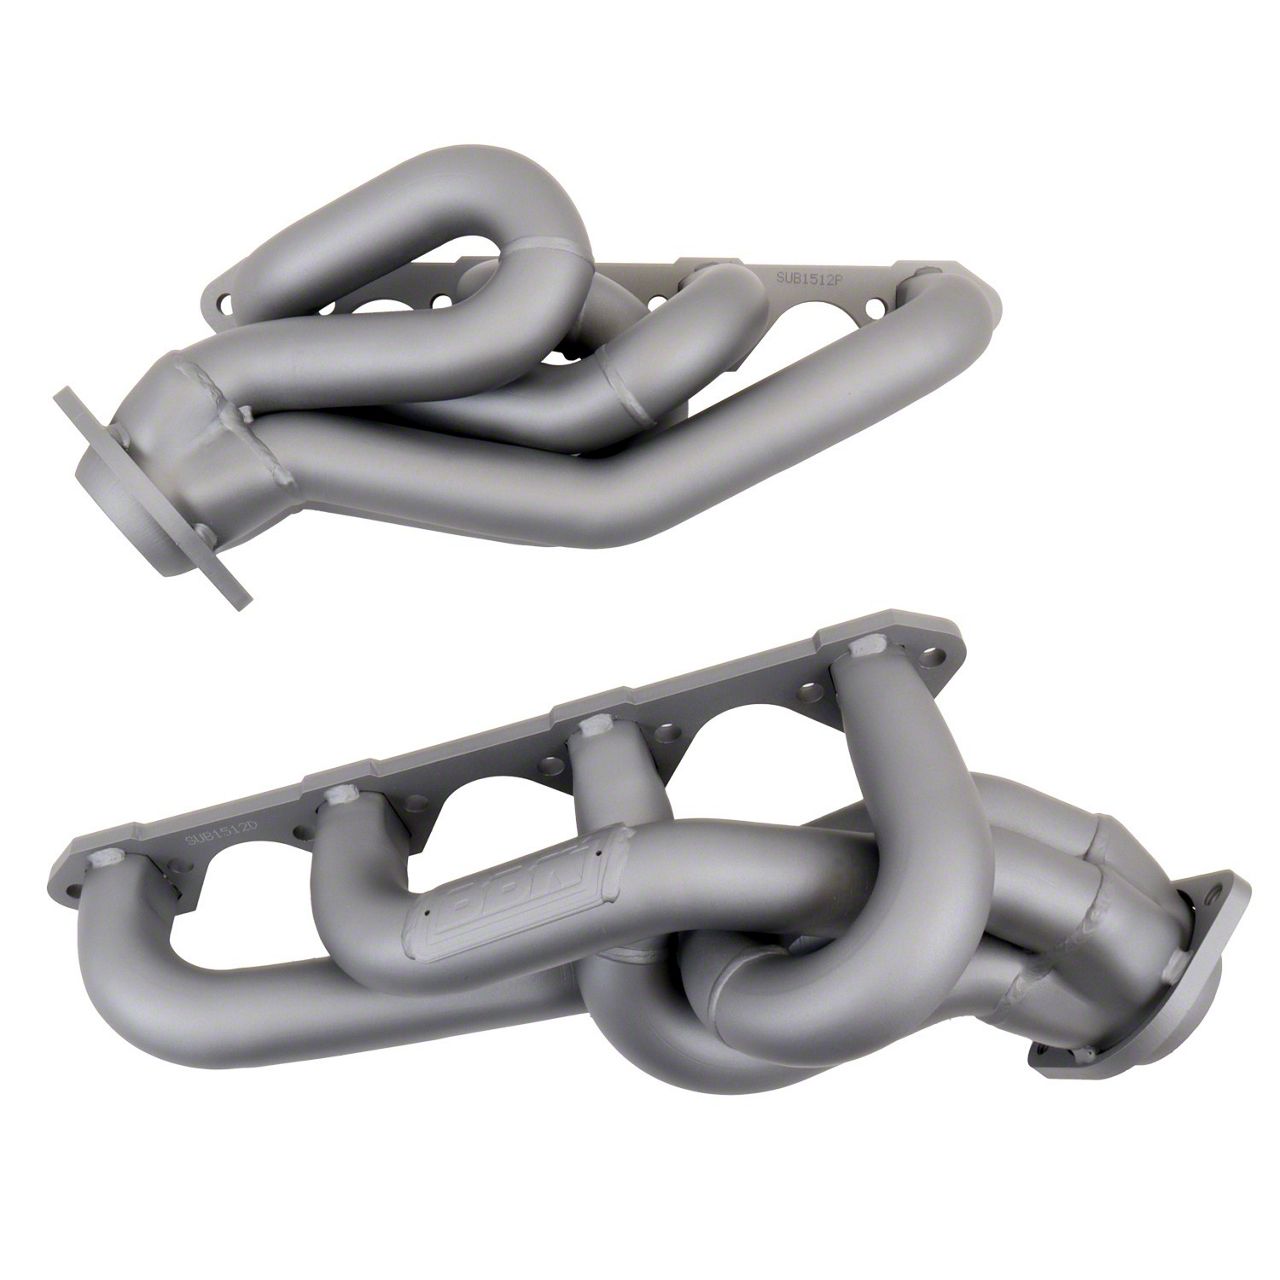 Chrome Finish BBK 1512 1-5/8 Shorty Equal Length Performance Exhaust Headers for Ford Mustang 5.0L 